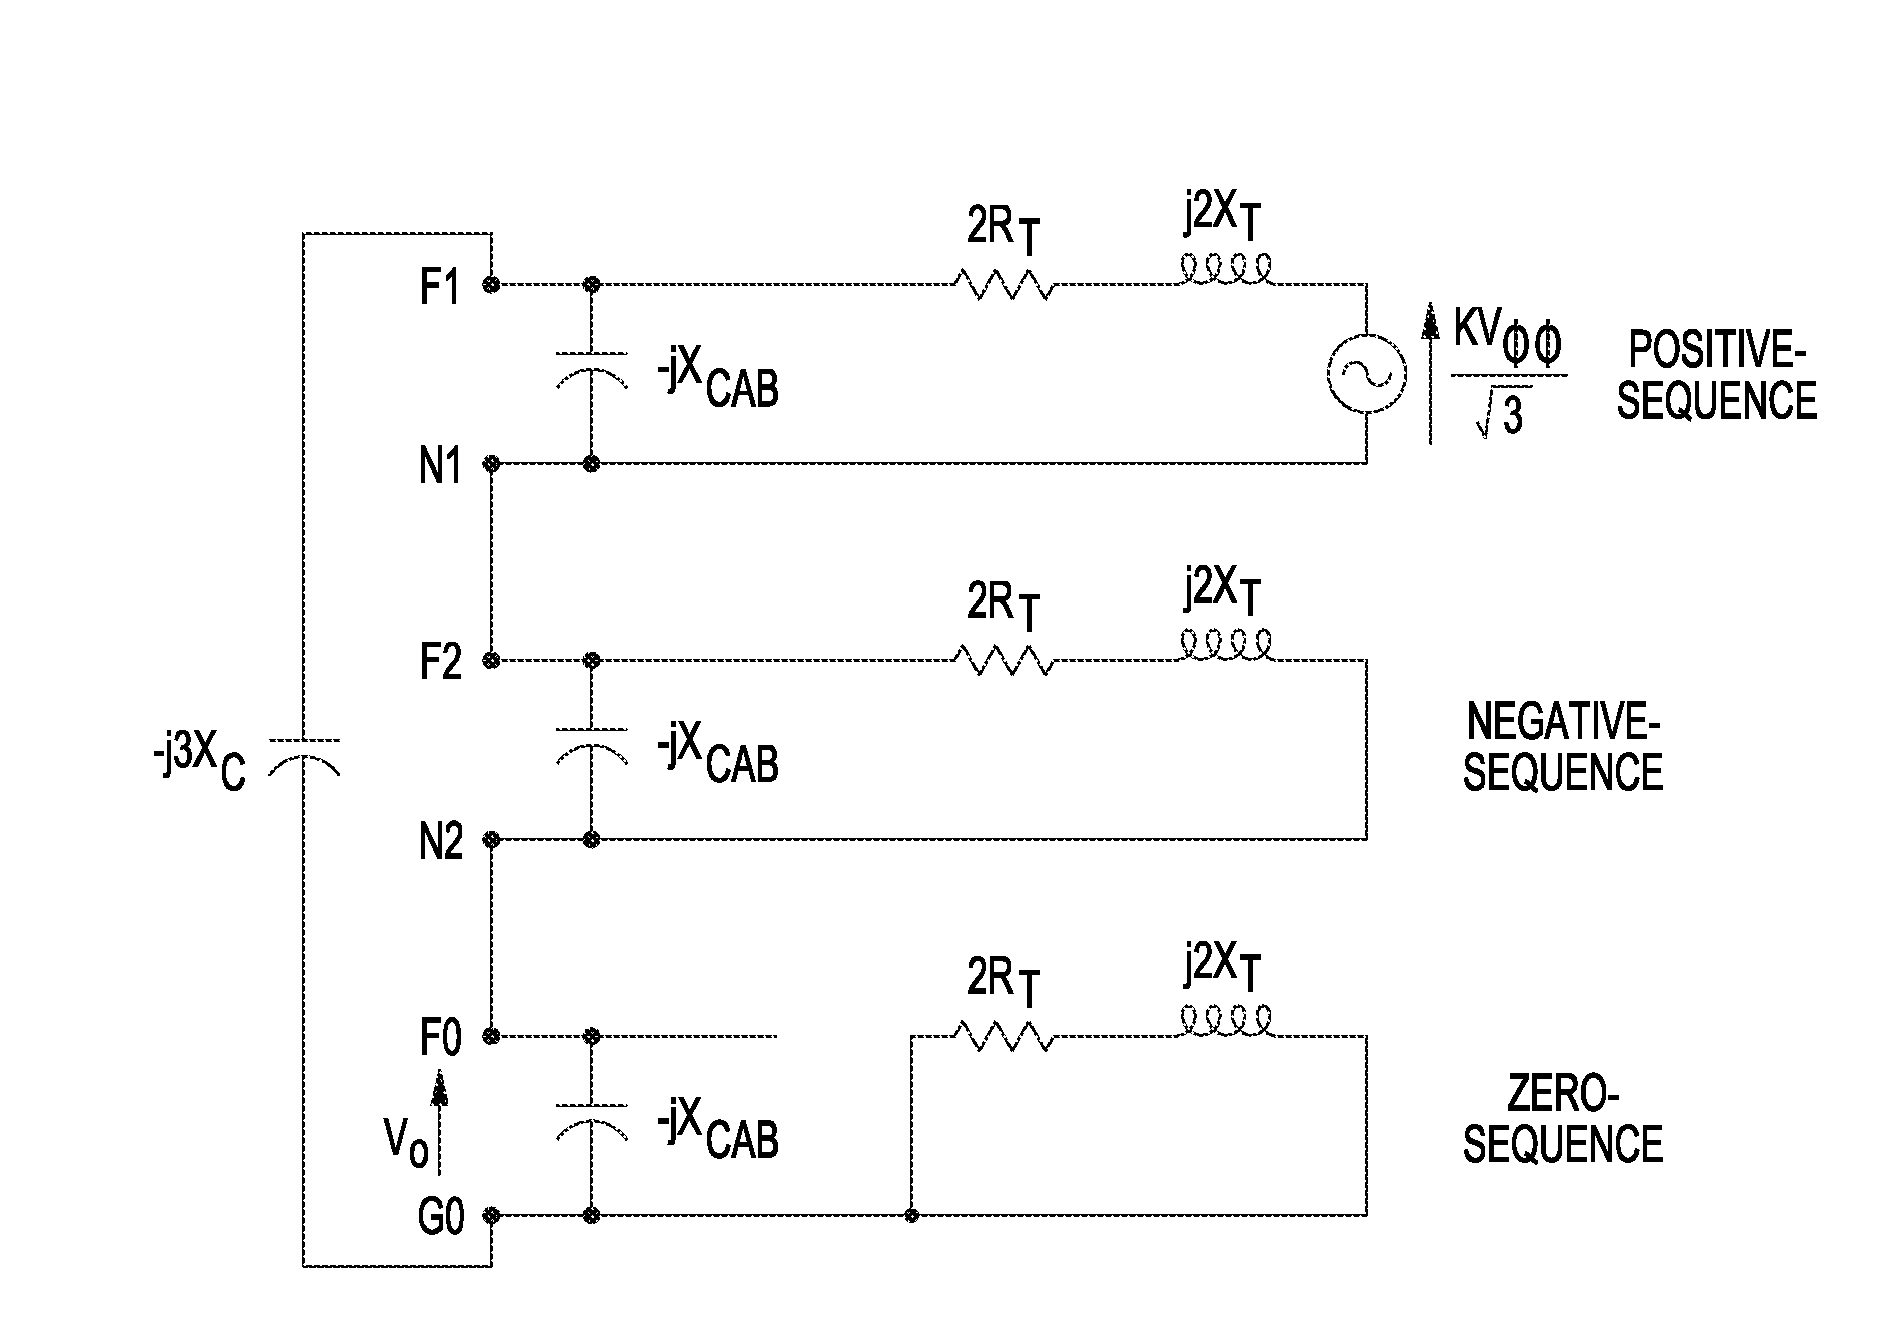 Feeder power source providing open feeder detection for a network protector by shifted neutral